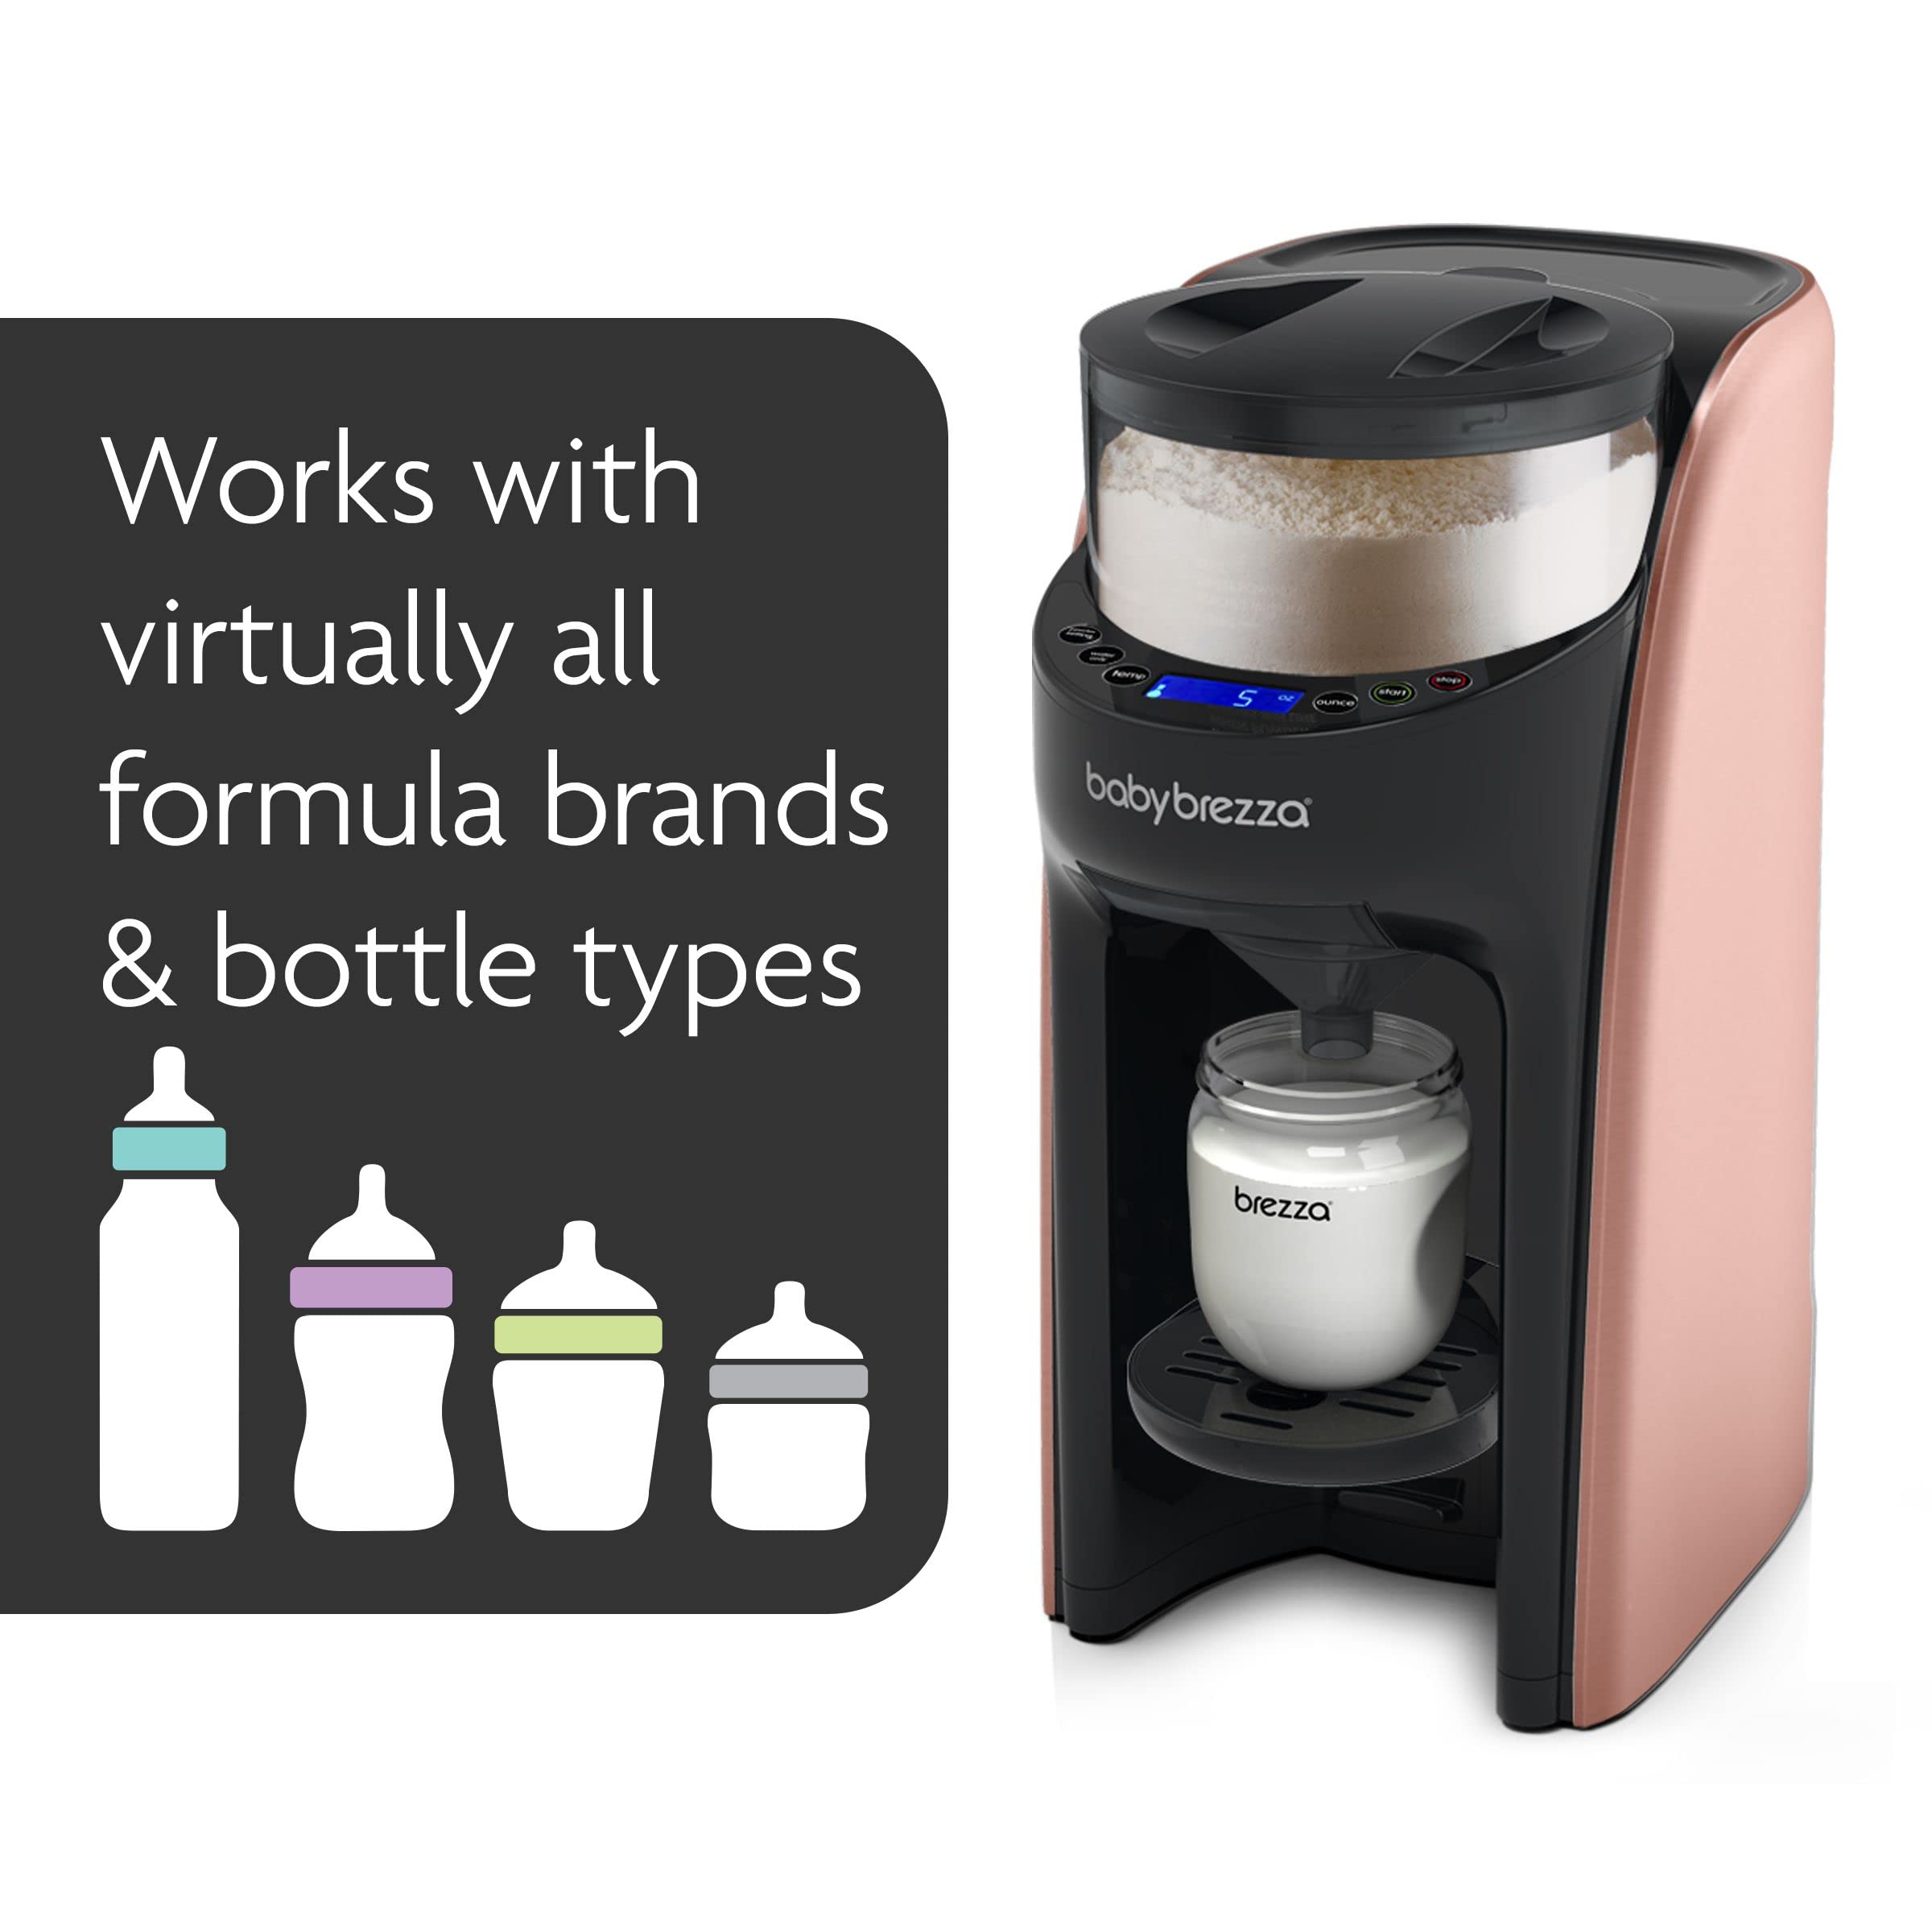 New and Improved Baby Brezza Formula Pro Advanced Formula Dispenser Machine - Automatically Mix a Warm Formula Bottle Instantly - Easily Make Bottle with Automatic Powder Blending, Rose Gold